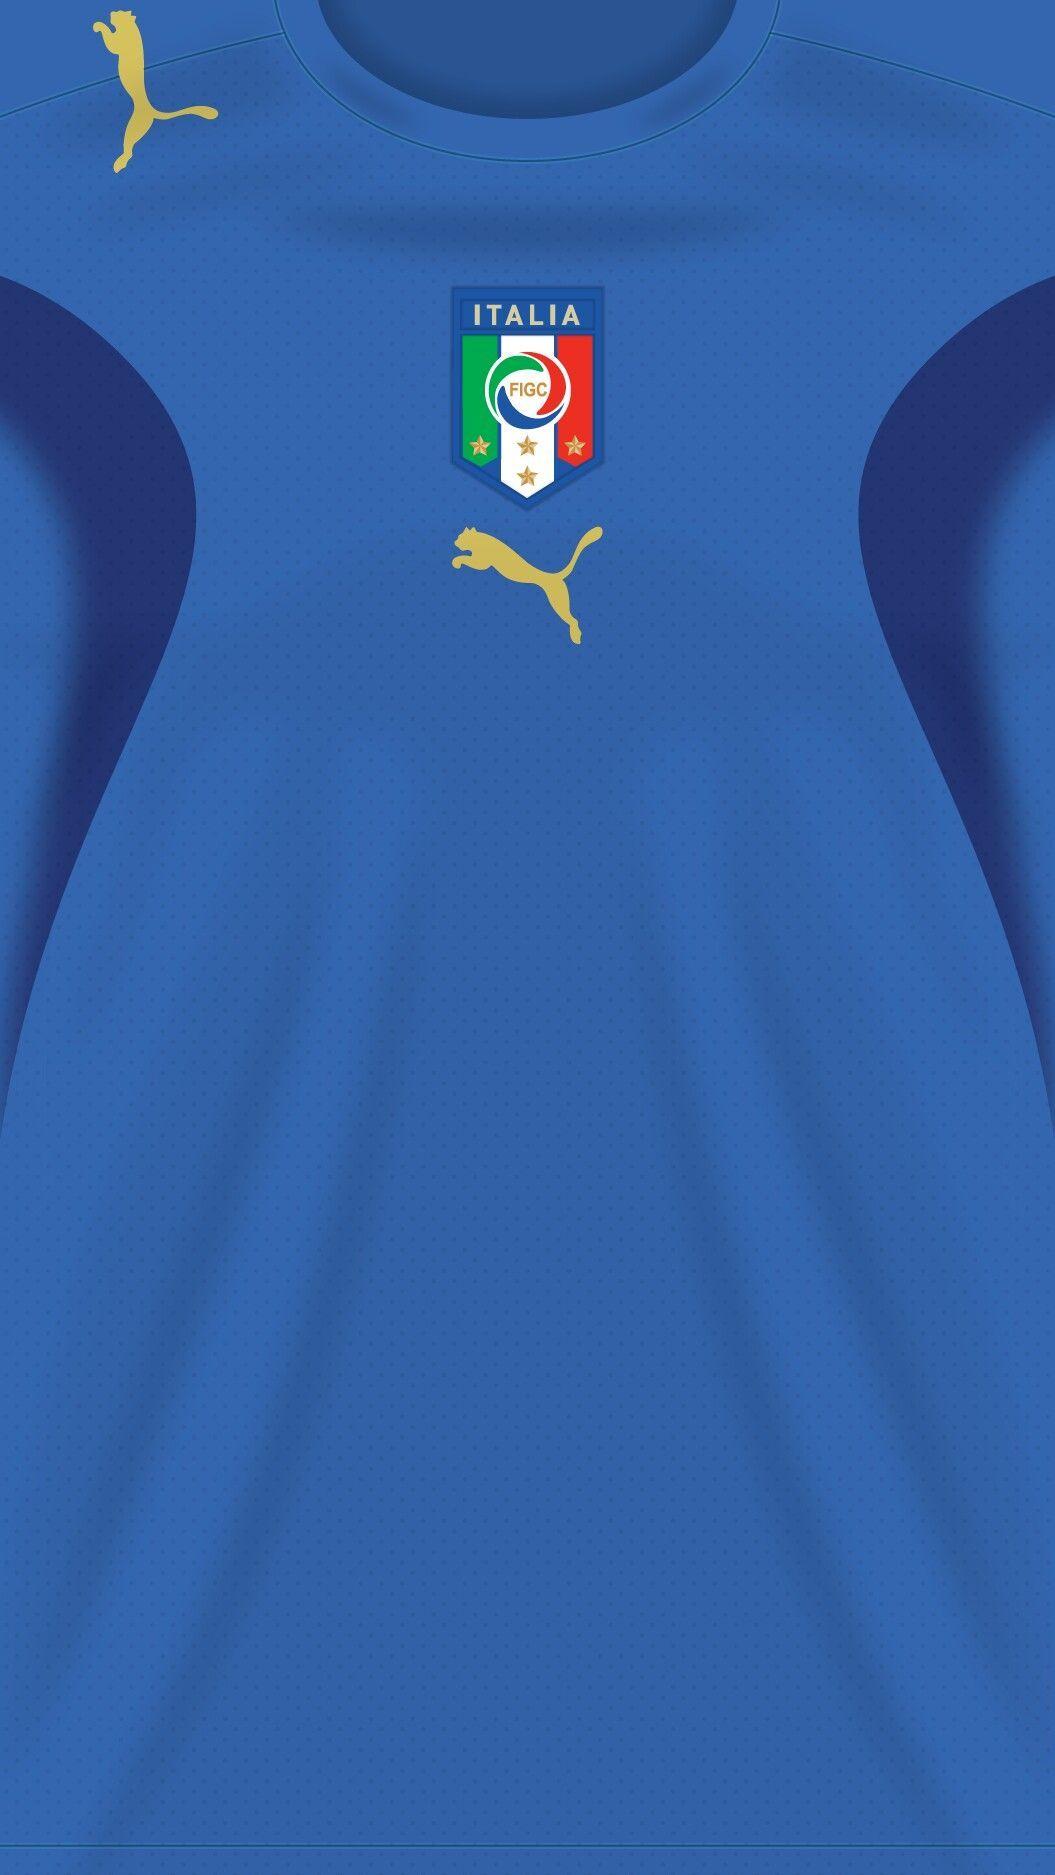 Italy ( World Cup Champion ) 06 07 Kit Home. Football